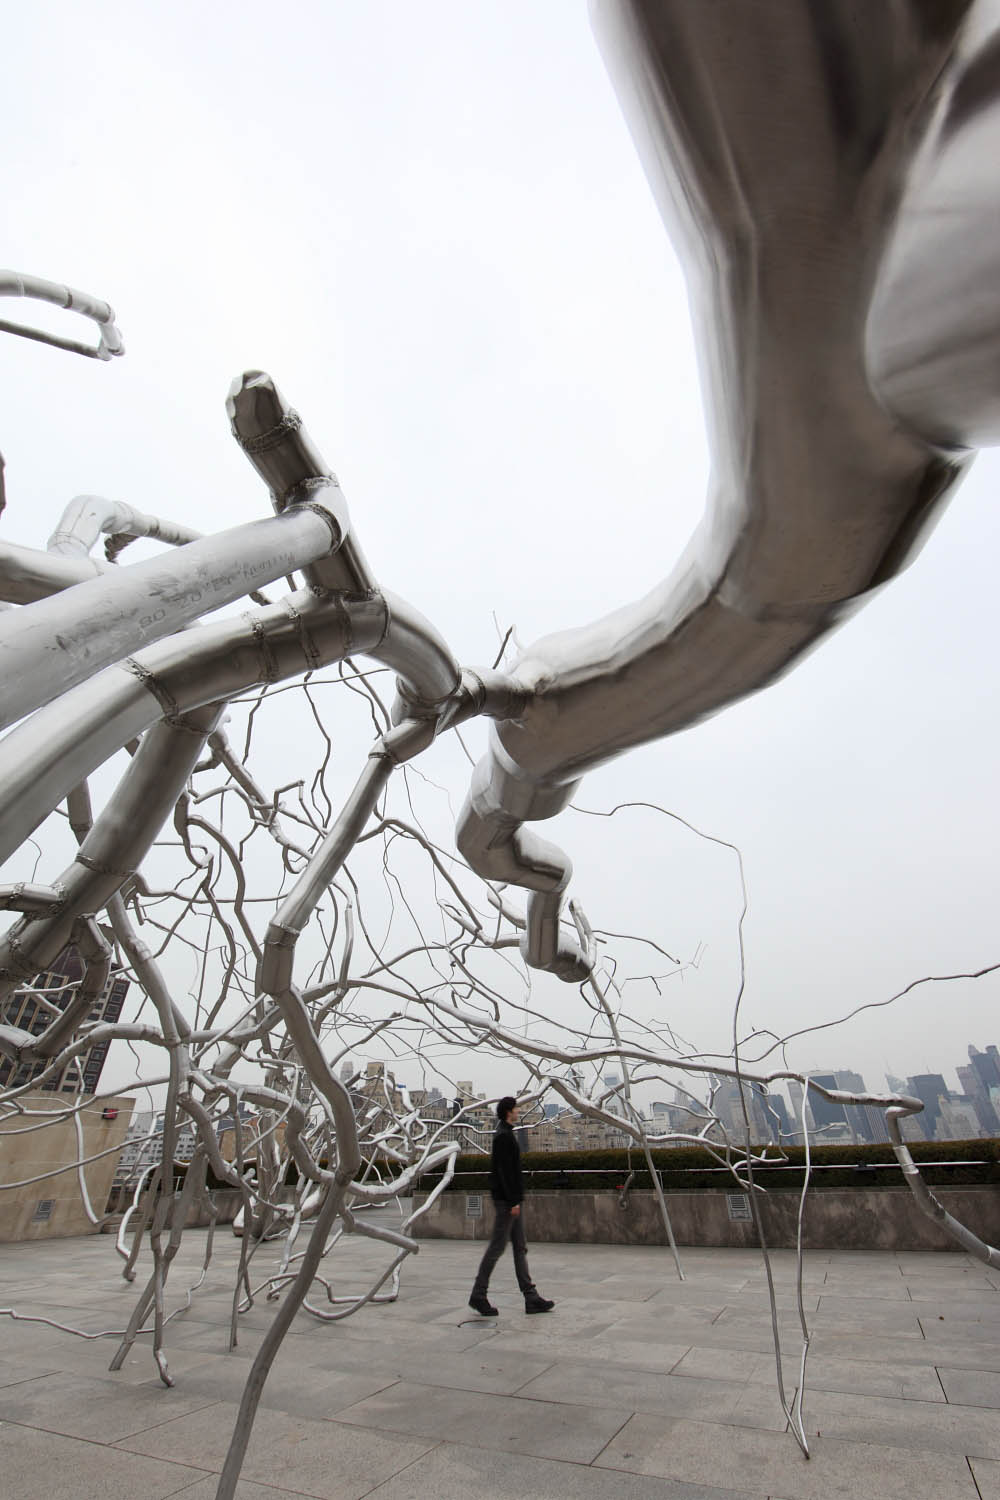  Maelstrom, 2009, Stainless steel, 22 x 140 x 50 feet,  Commissioned for the Metropolitan Museum of Art, Iris B. and Gerald Cantor Roof Garden, New York for the exhibition Roxy Paine on the Roof: Maelstrom&nbsp;April 28 through October 25, 2009&nbsp;